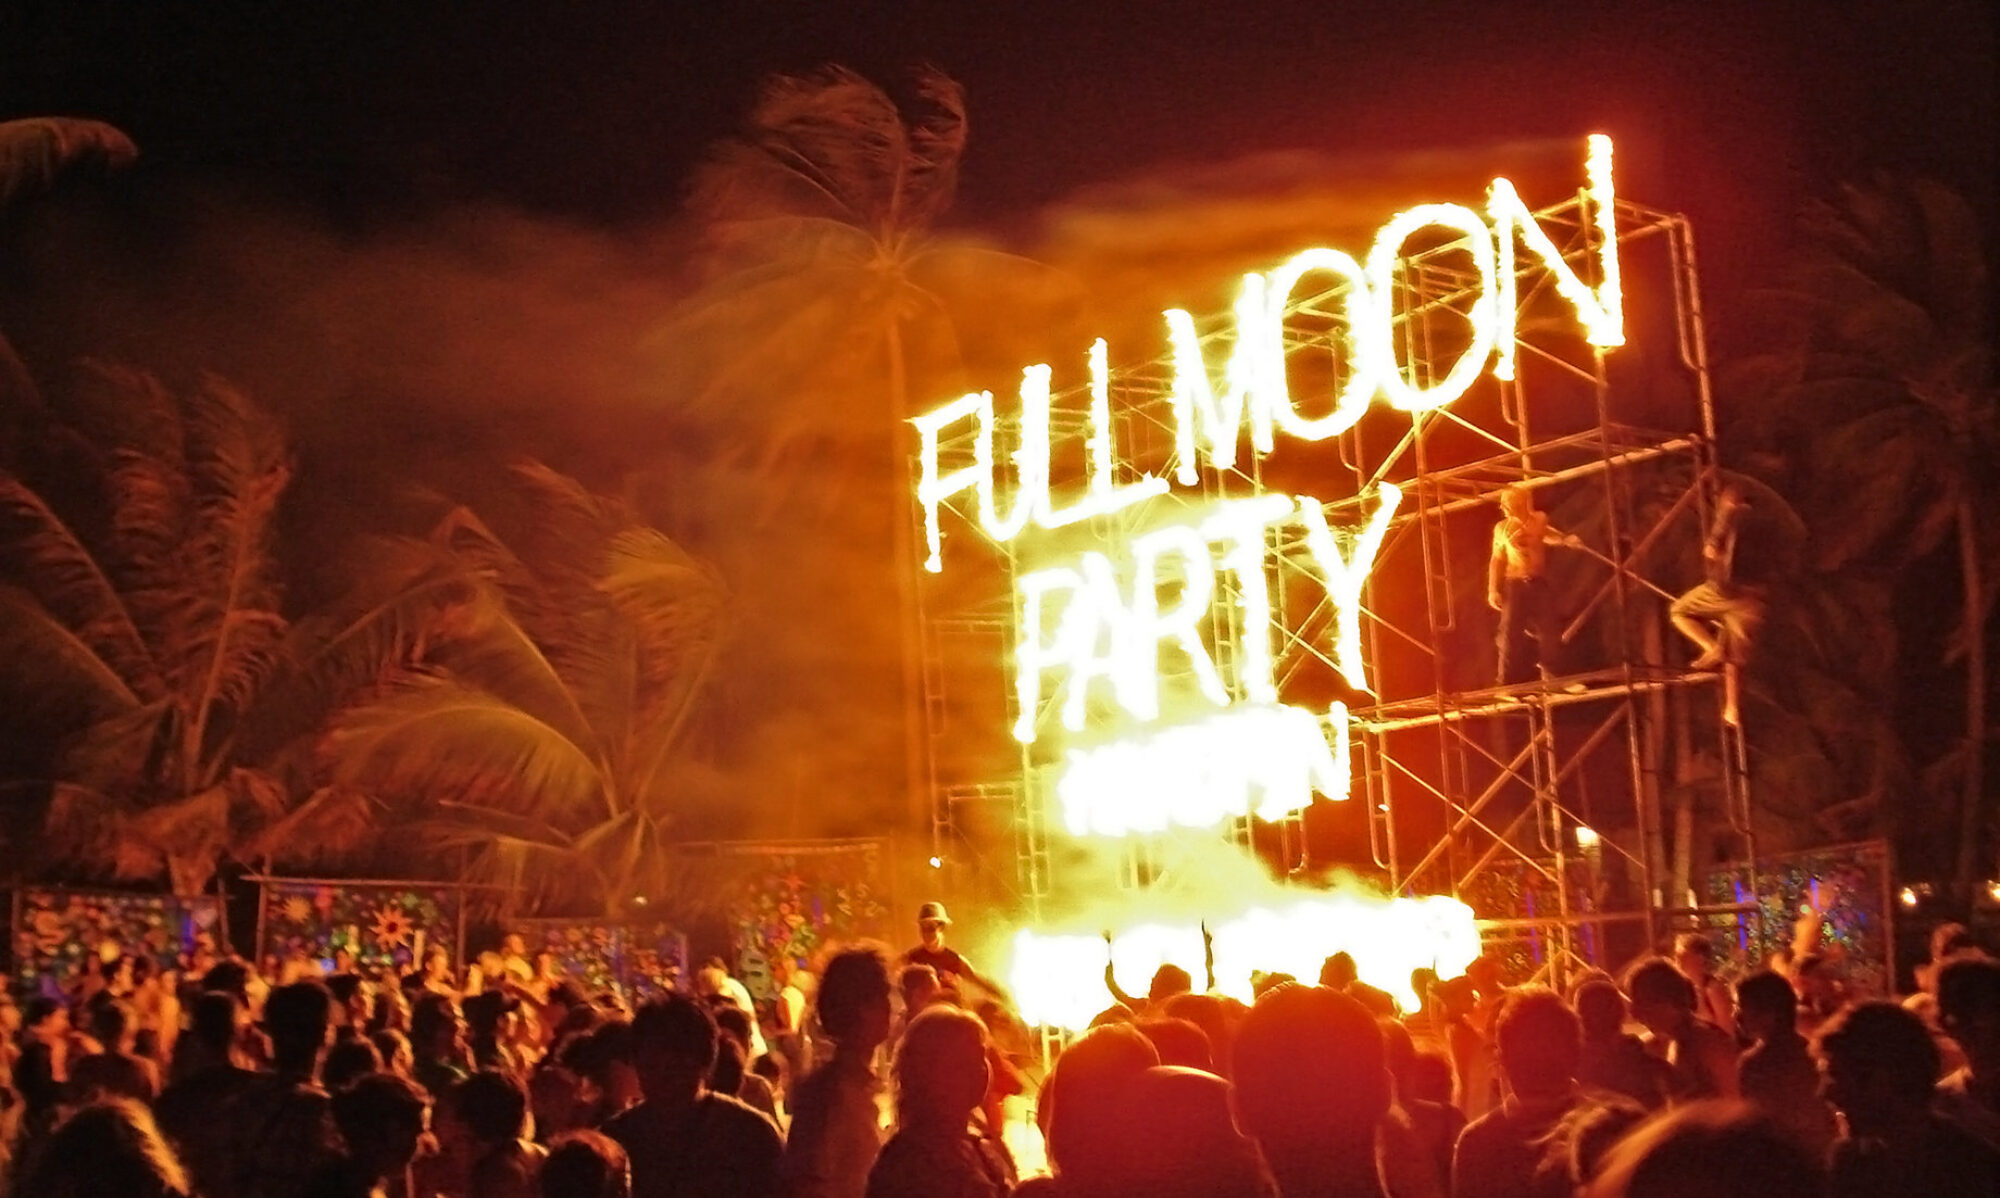 FullMoon Party